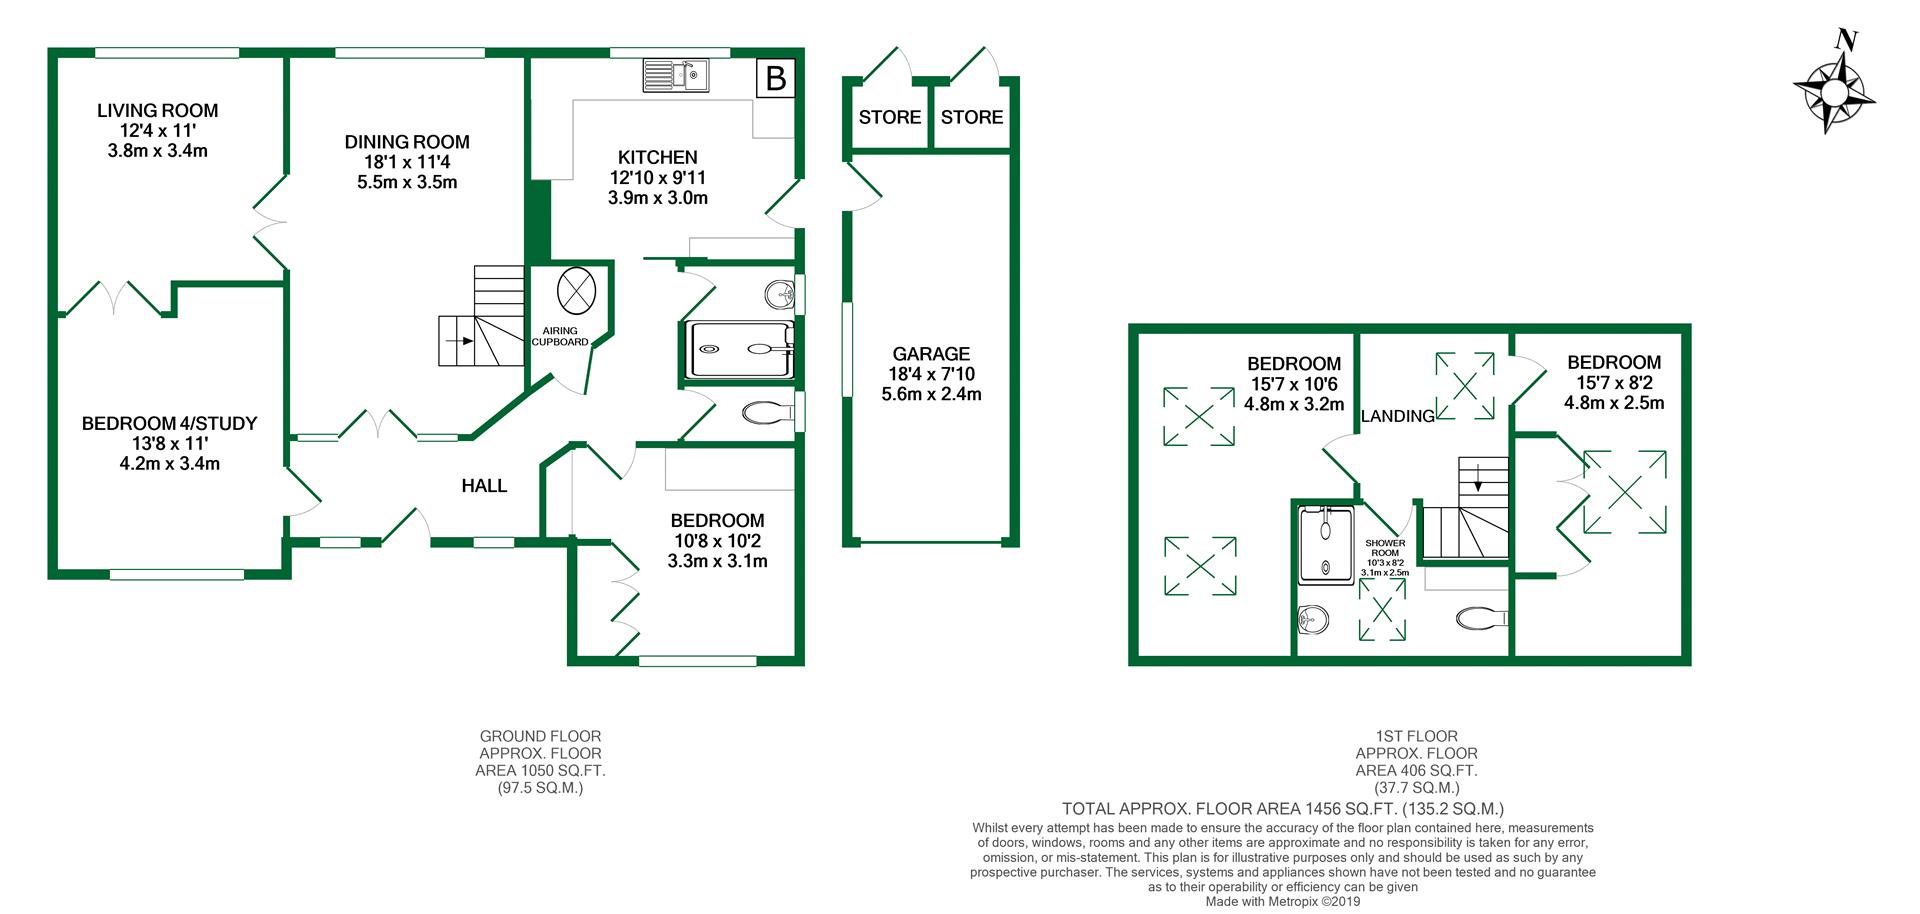 Floorplans For 11 Old Bath Road, Charvil, Reading